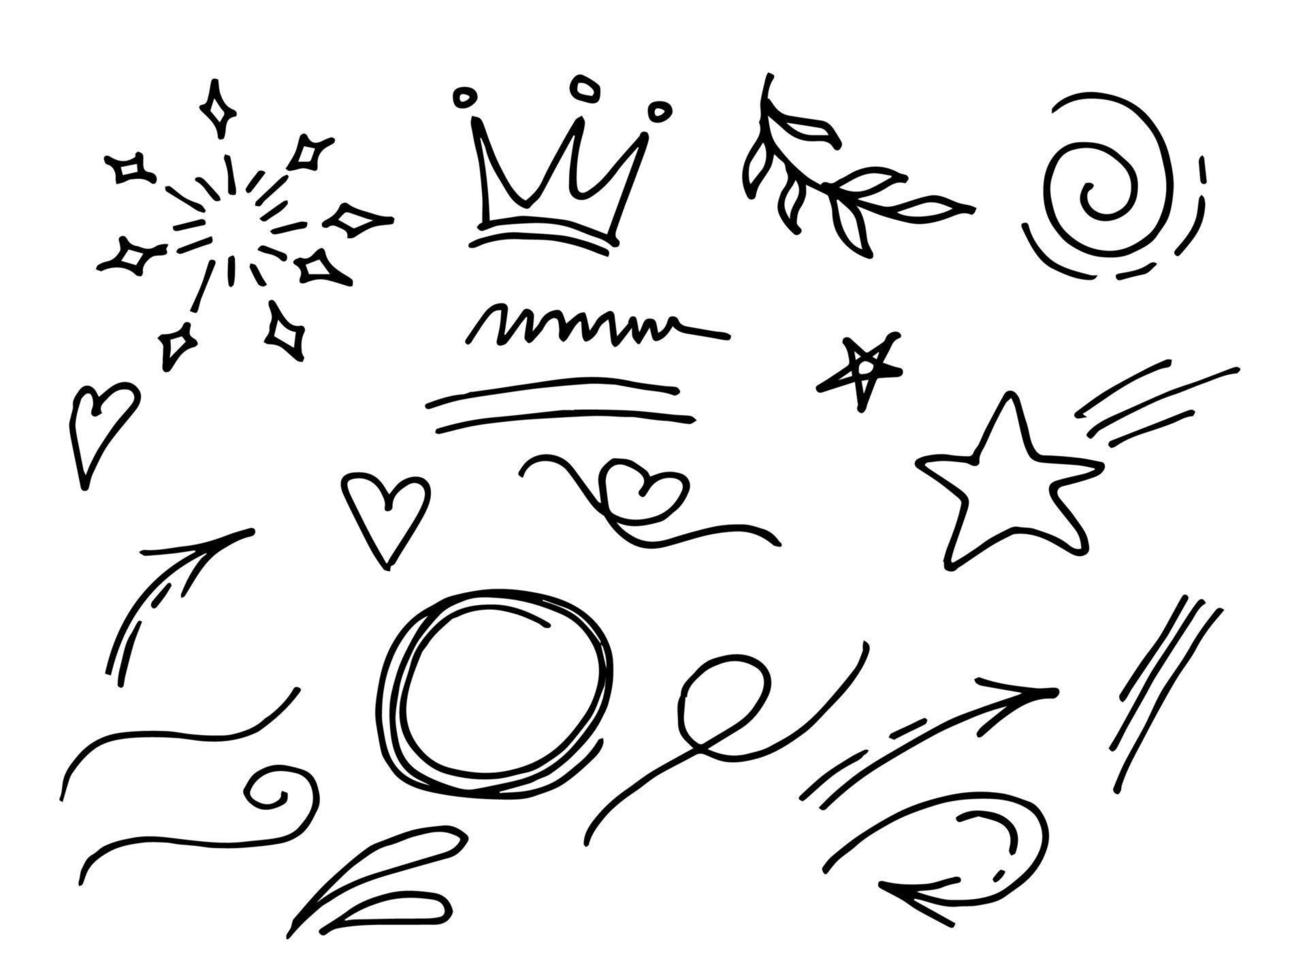 Vector hand drawn collection of design element. curly swishes, swoops, swirl, arrow, heart, love, crown, starburst. ribbon, leaf, star, highlight text and emphasis element. use for concept design